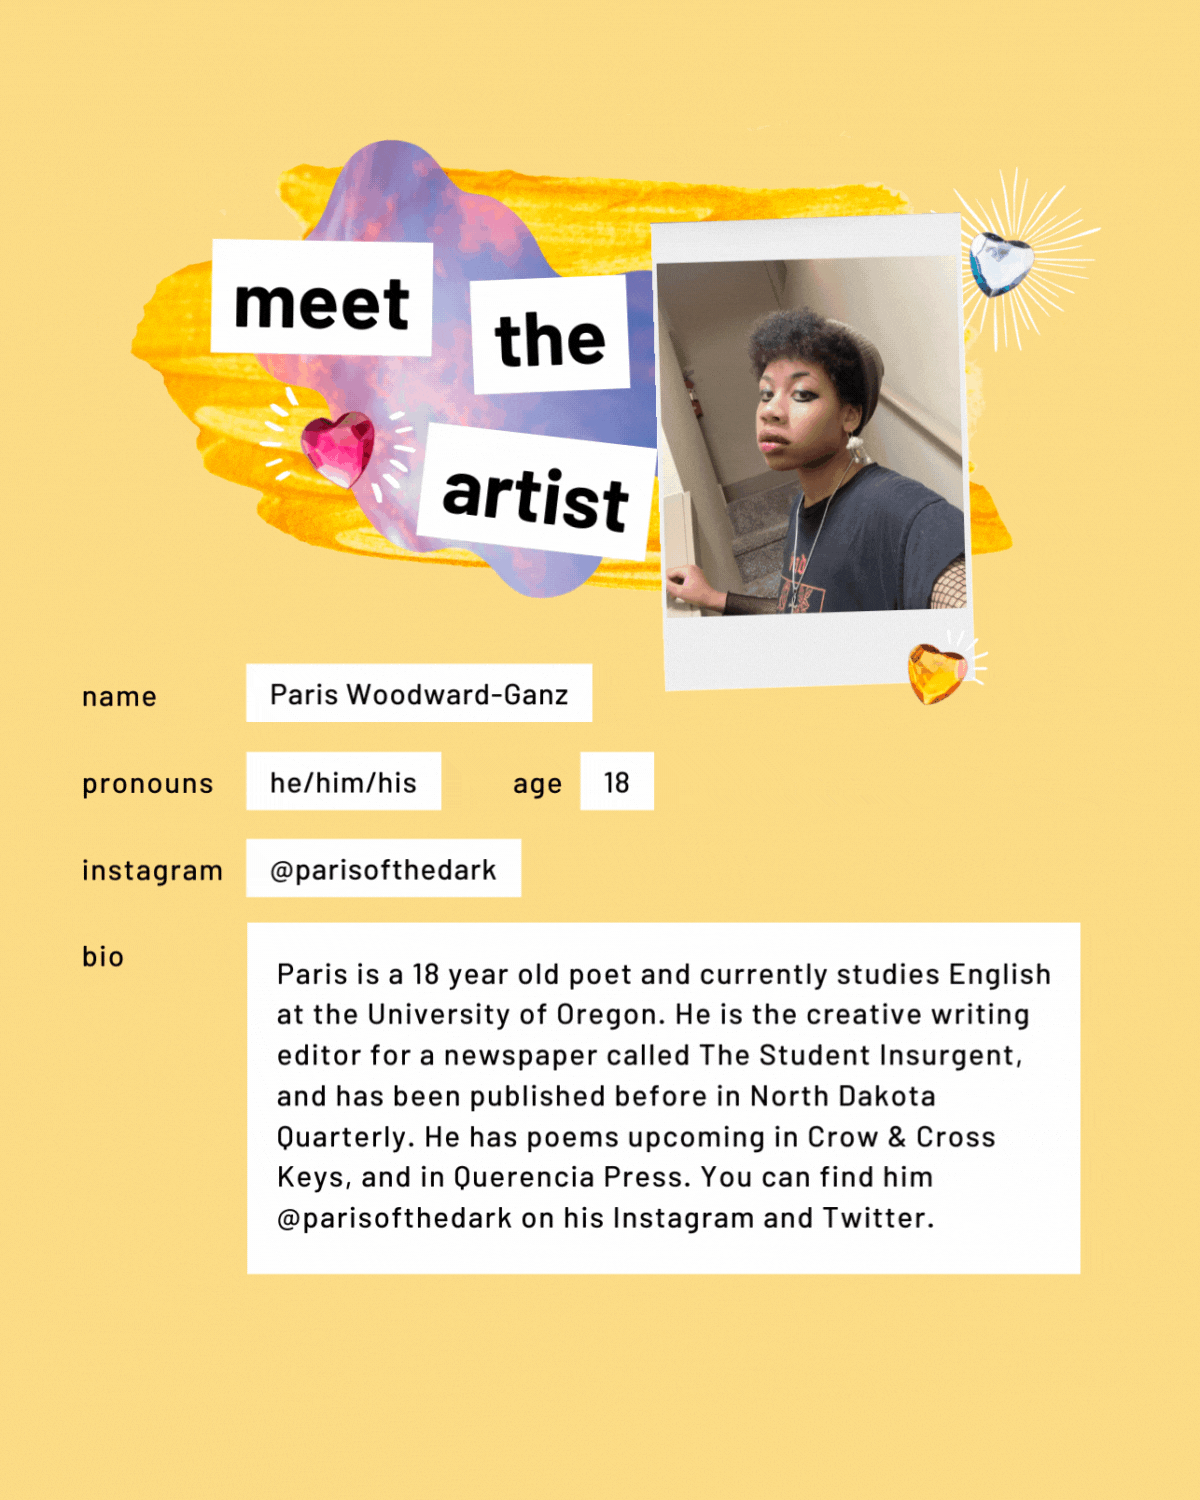 Meet the artist page with a photo. Name: Paris Woodward-Ganz. Pronouns: he/him/his. Age: 18. Instagram: parisofthedark. Bio: Paris is a 18 year old poet and currently studies English at the University of Oregon. He is the creative writing editor for a newspaper called The Student Insurgent, and has been published before in North Dakota Quarterly. He has poems upcoming in Crow & Cross Keys, and in Querencia Press. You can find him @parisofthedark on his Instagram and Twitter.